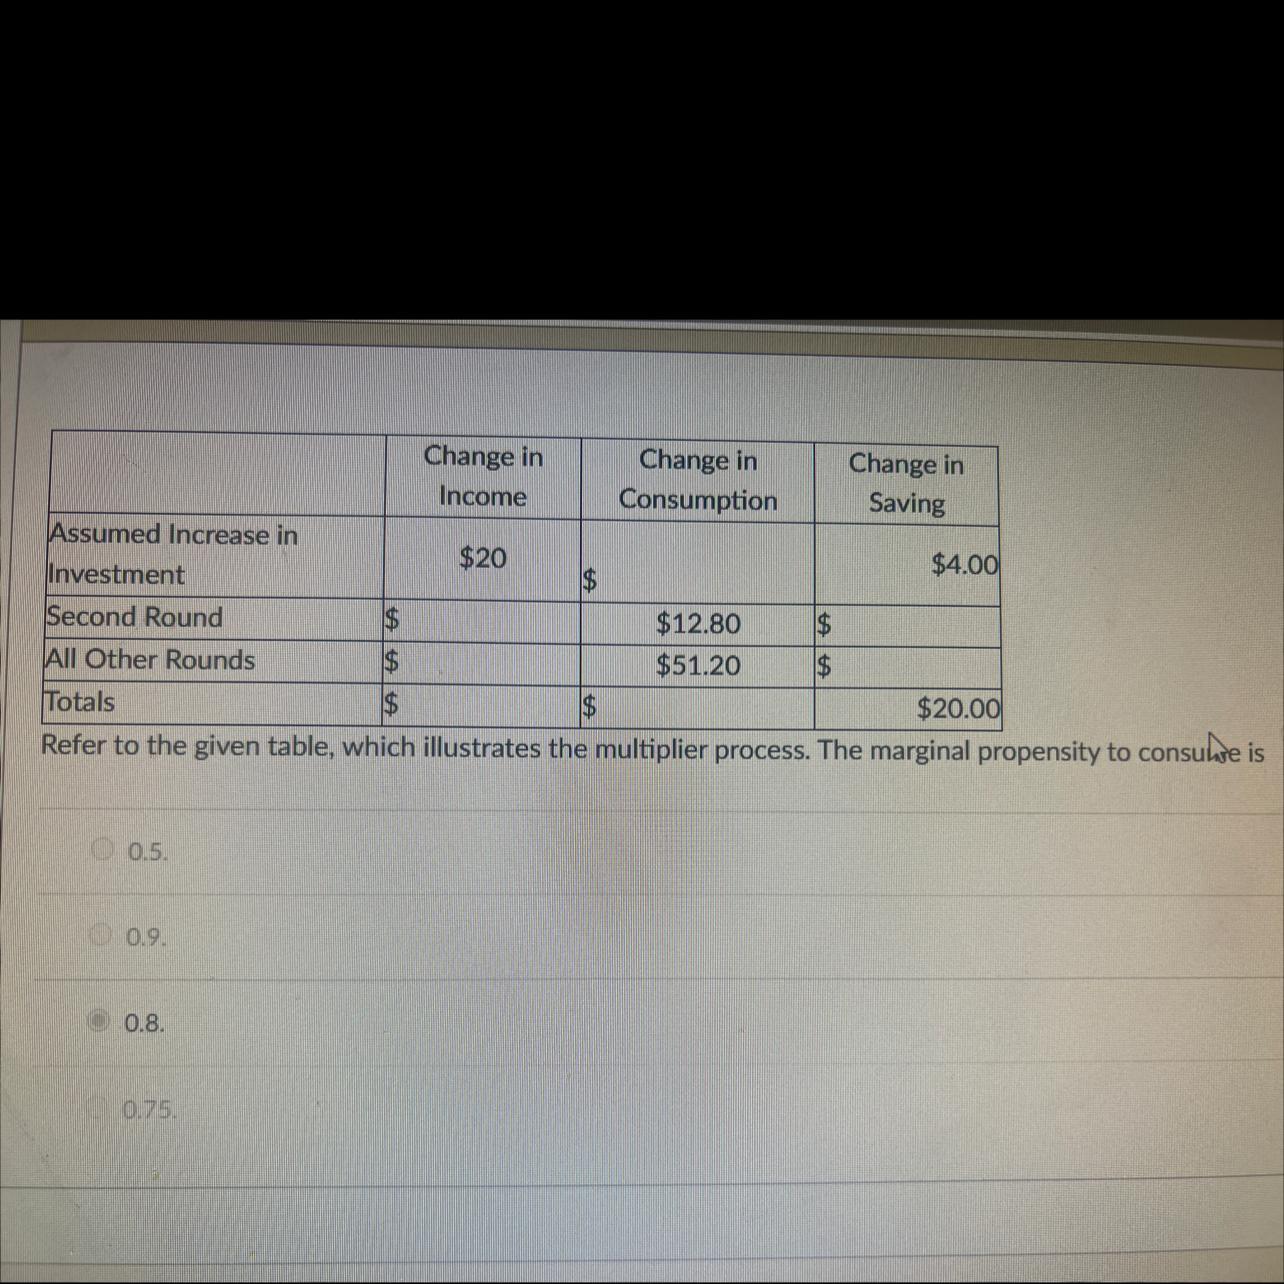 Refer To The Table, Which Illustrates The Multiplier Process. The Marginal Propensity To Consume Is